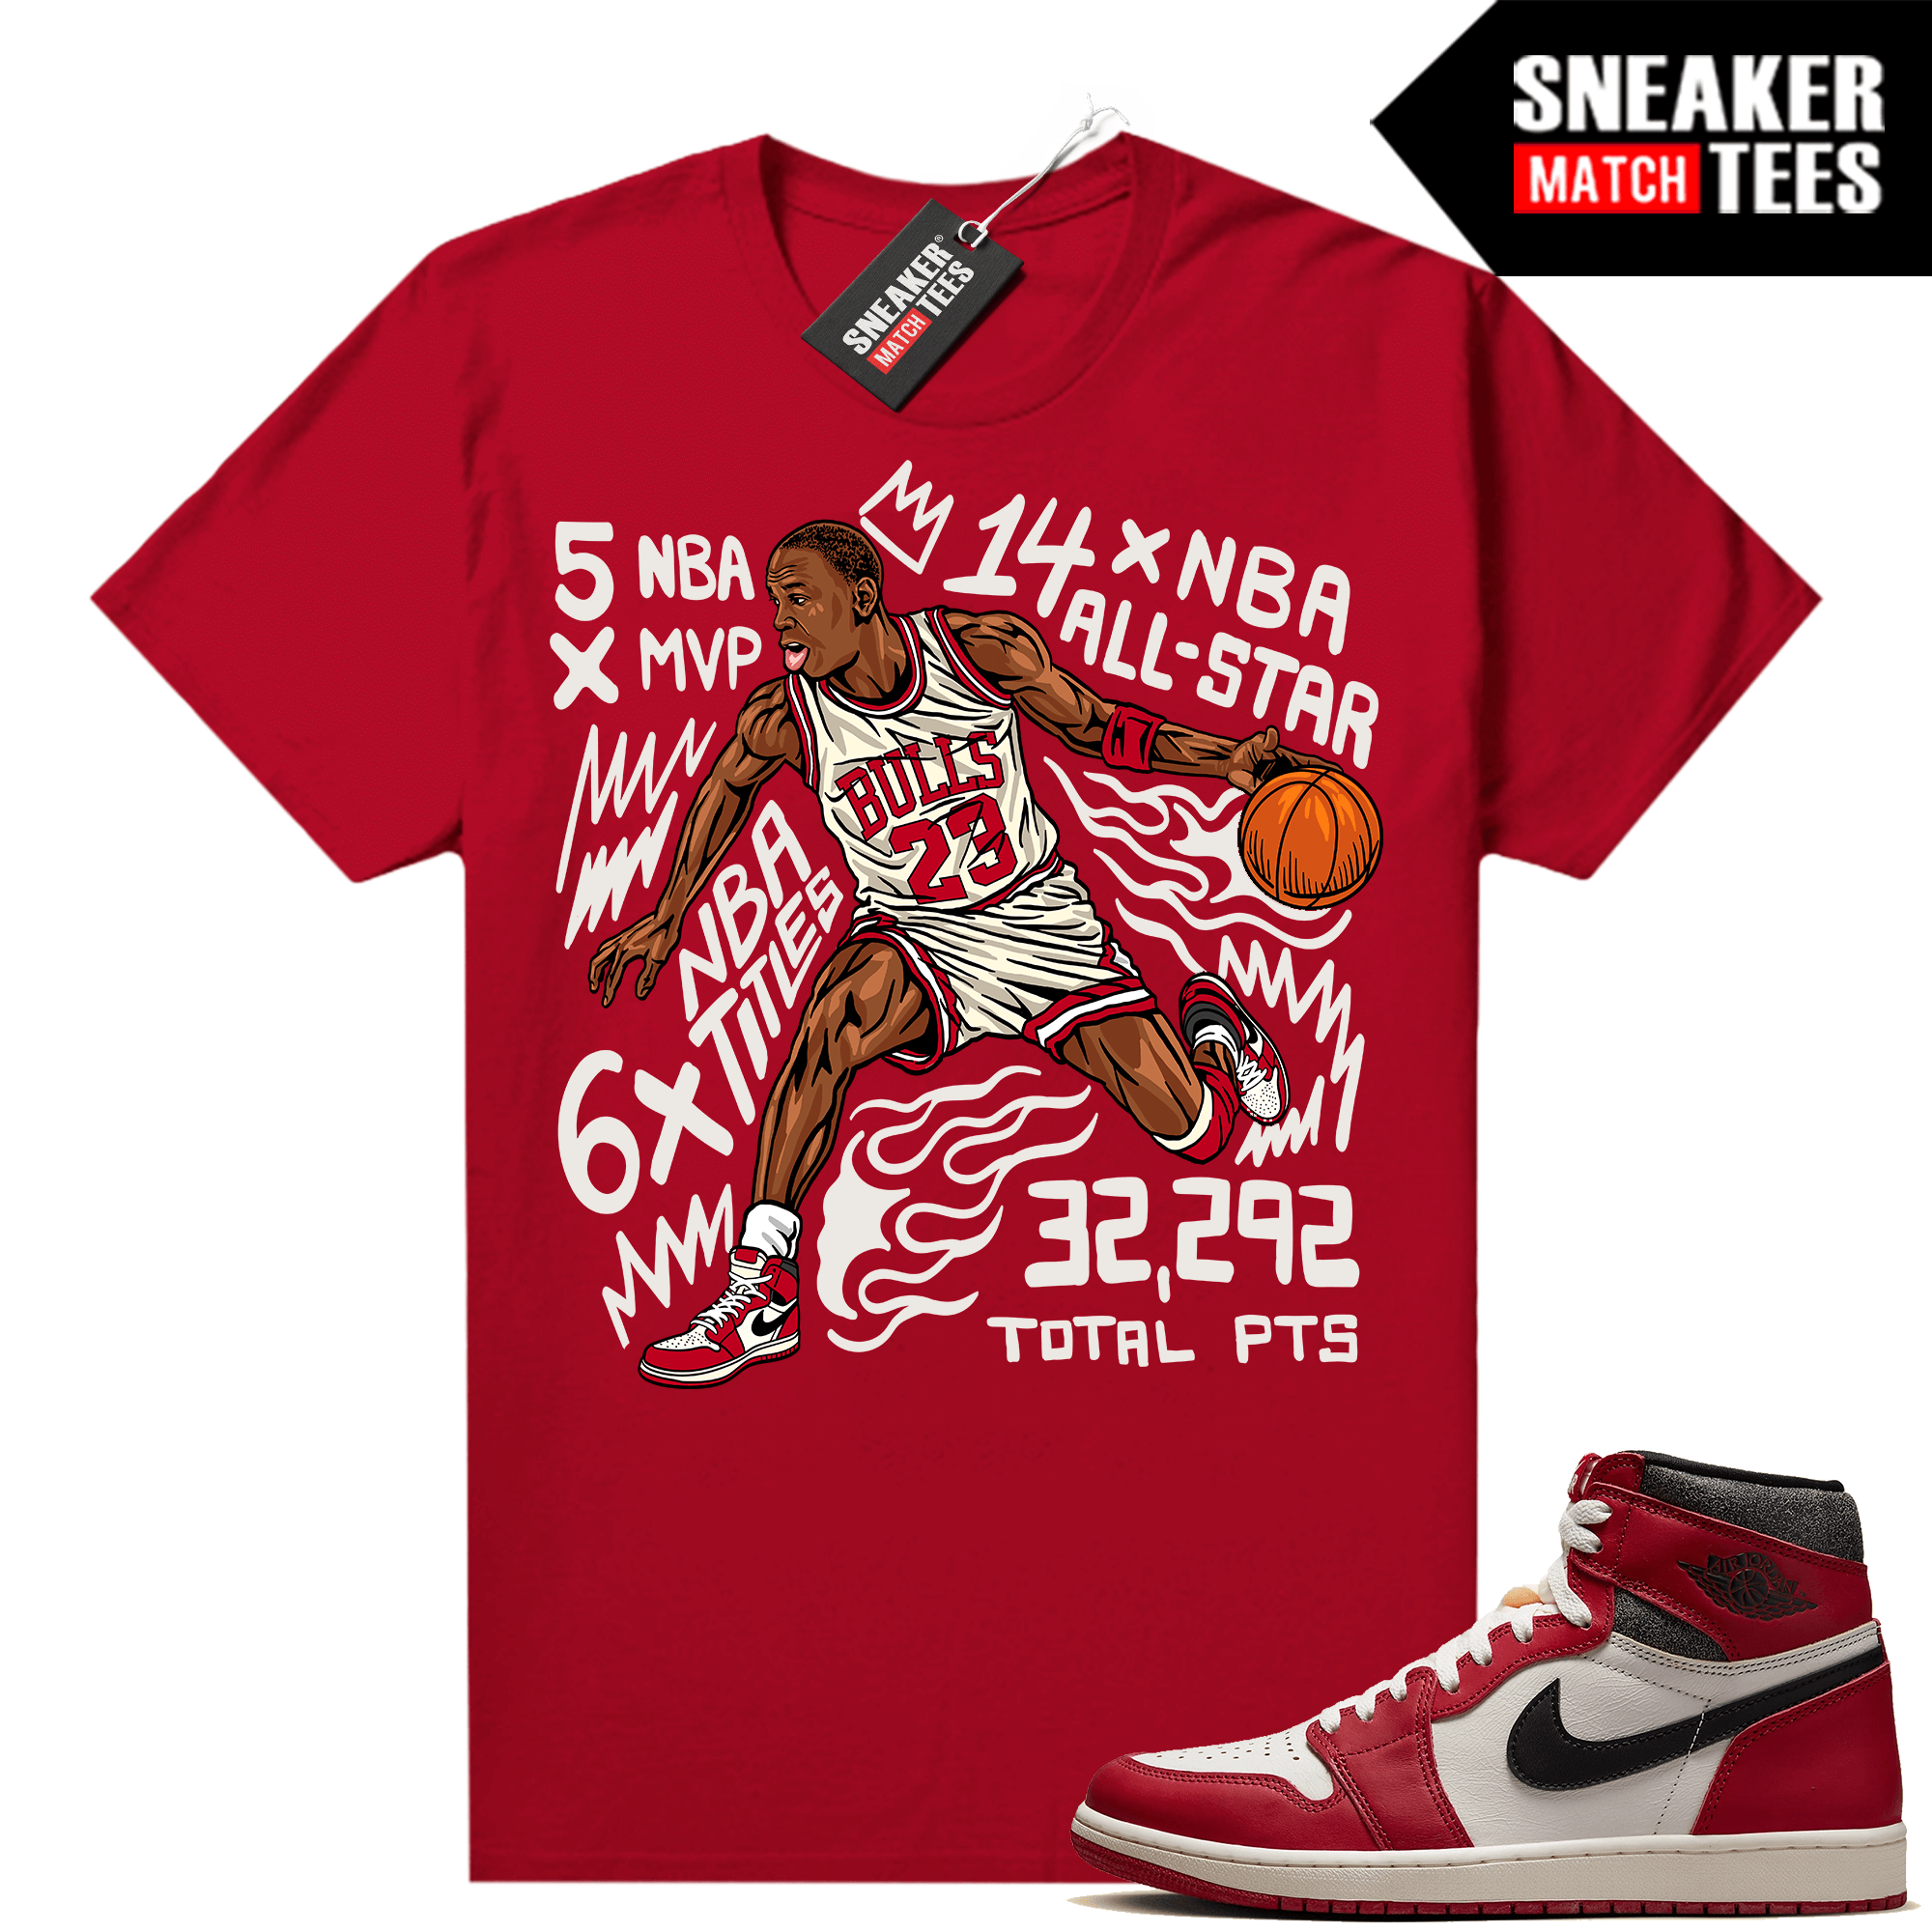 Chicago 1s Lost and Found Ariss-eu Sneaker Match Shirt Red MJ Fast Break